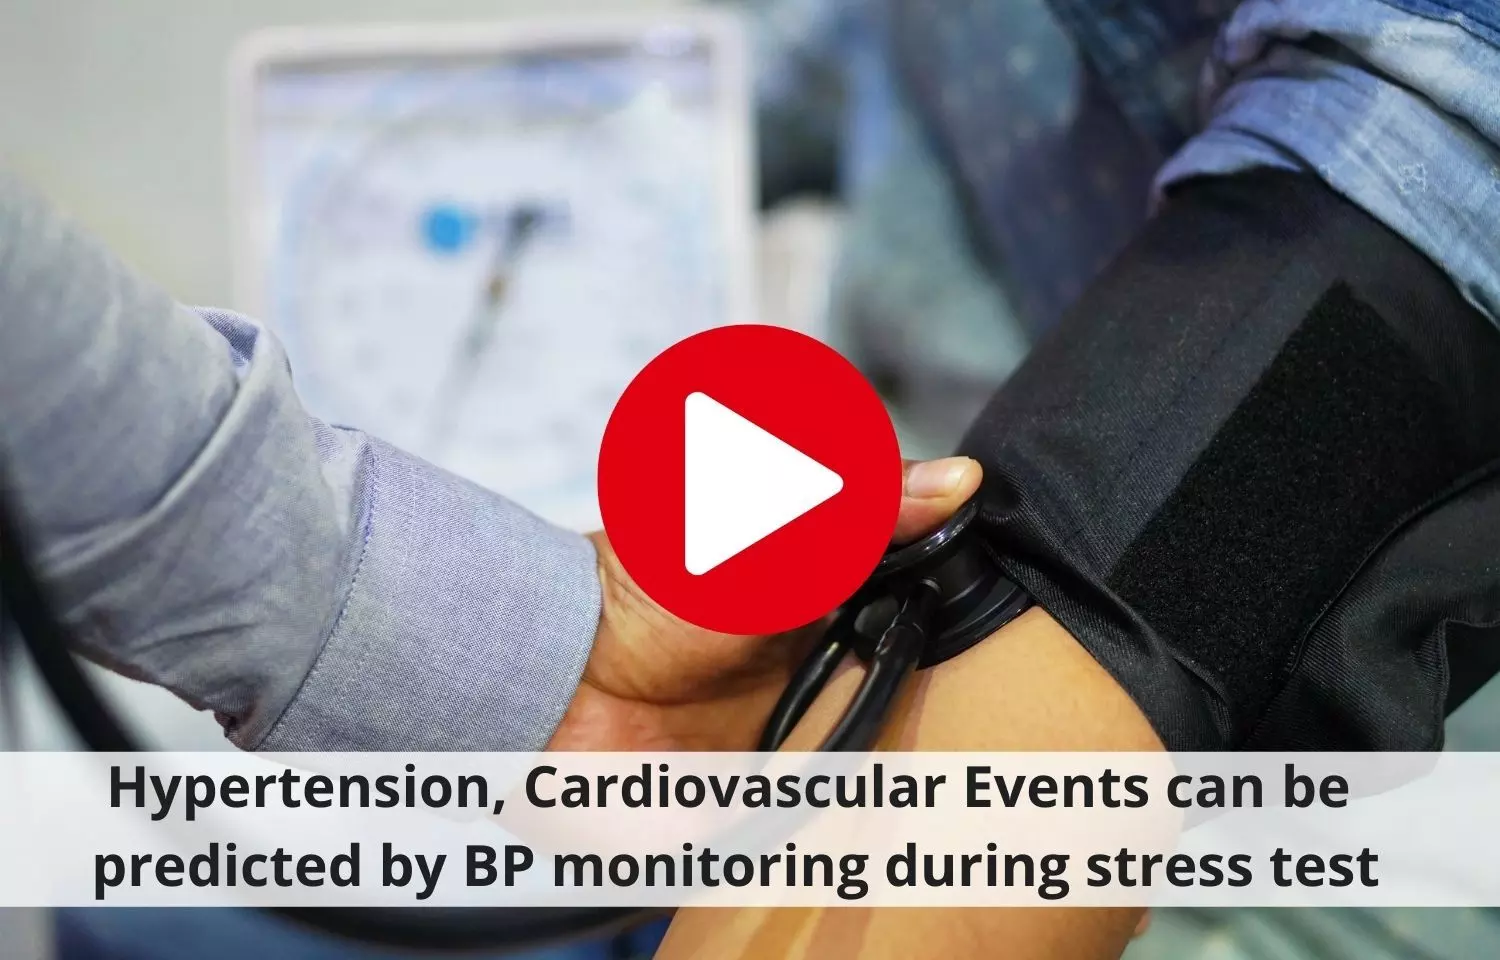 Hypertension, Cardiovascular events can be predicted by BP monitoring during stress test